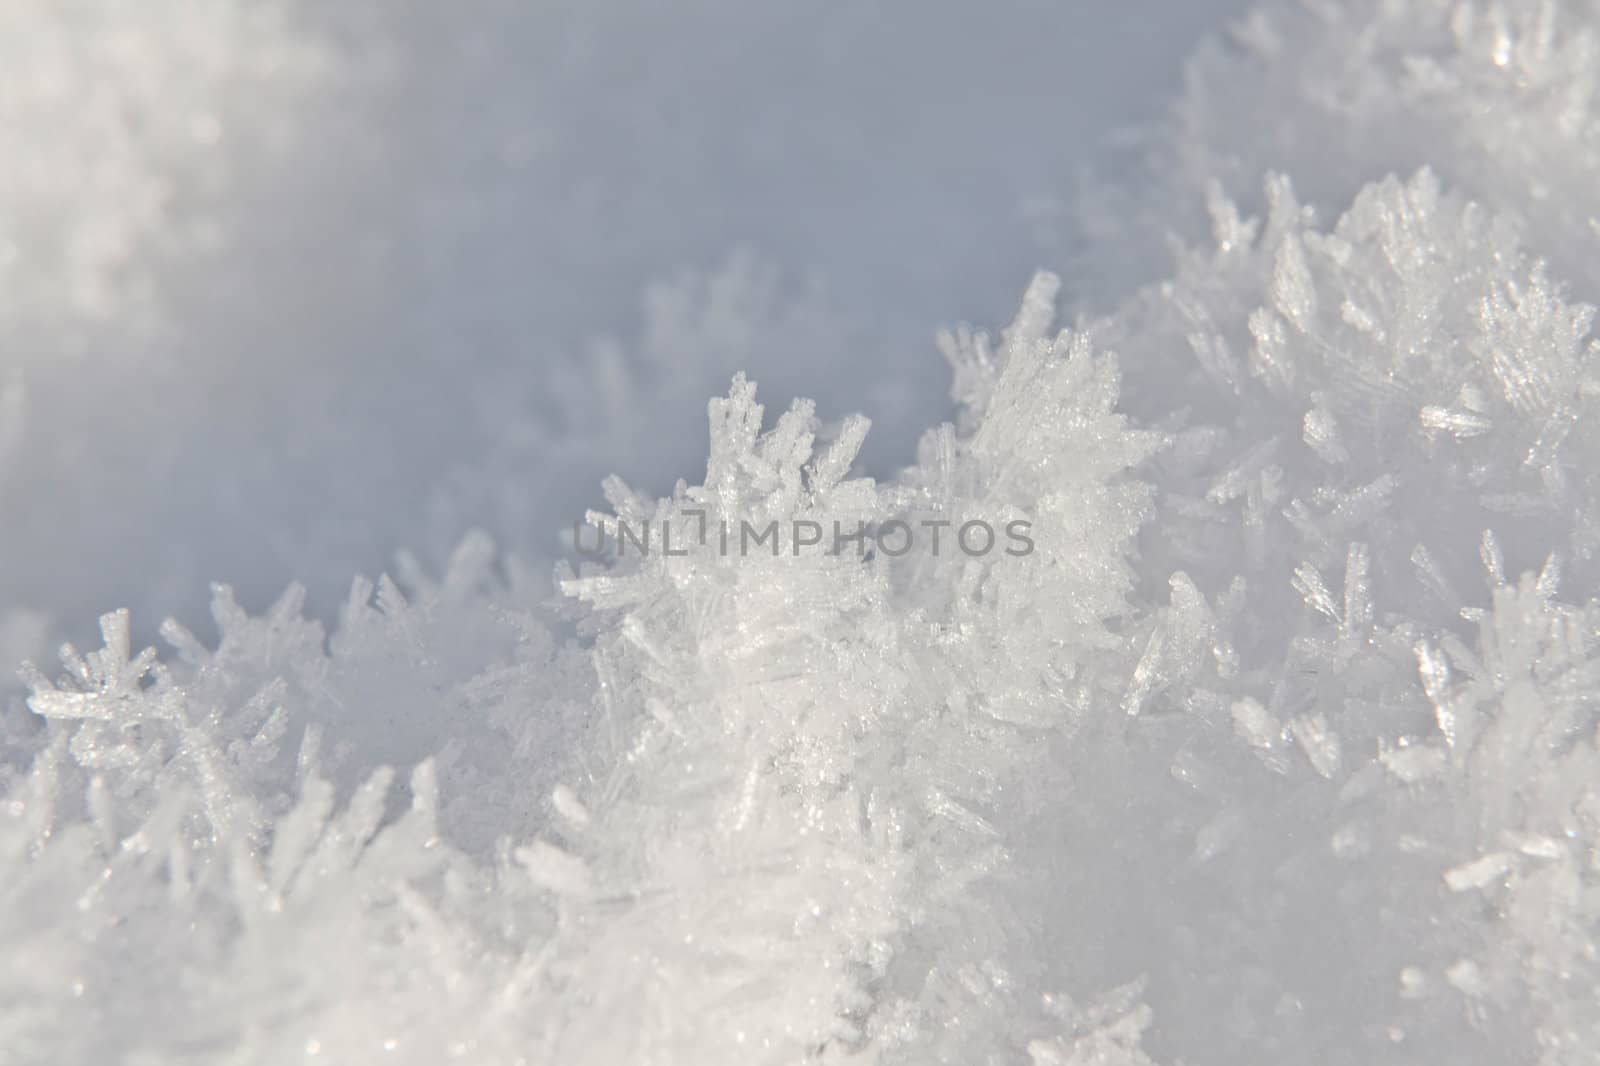 This image shows a extreme macro from a snow surface